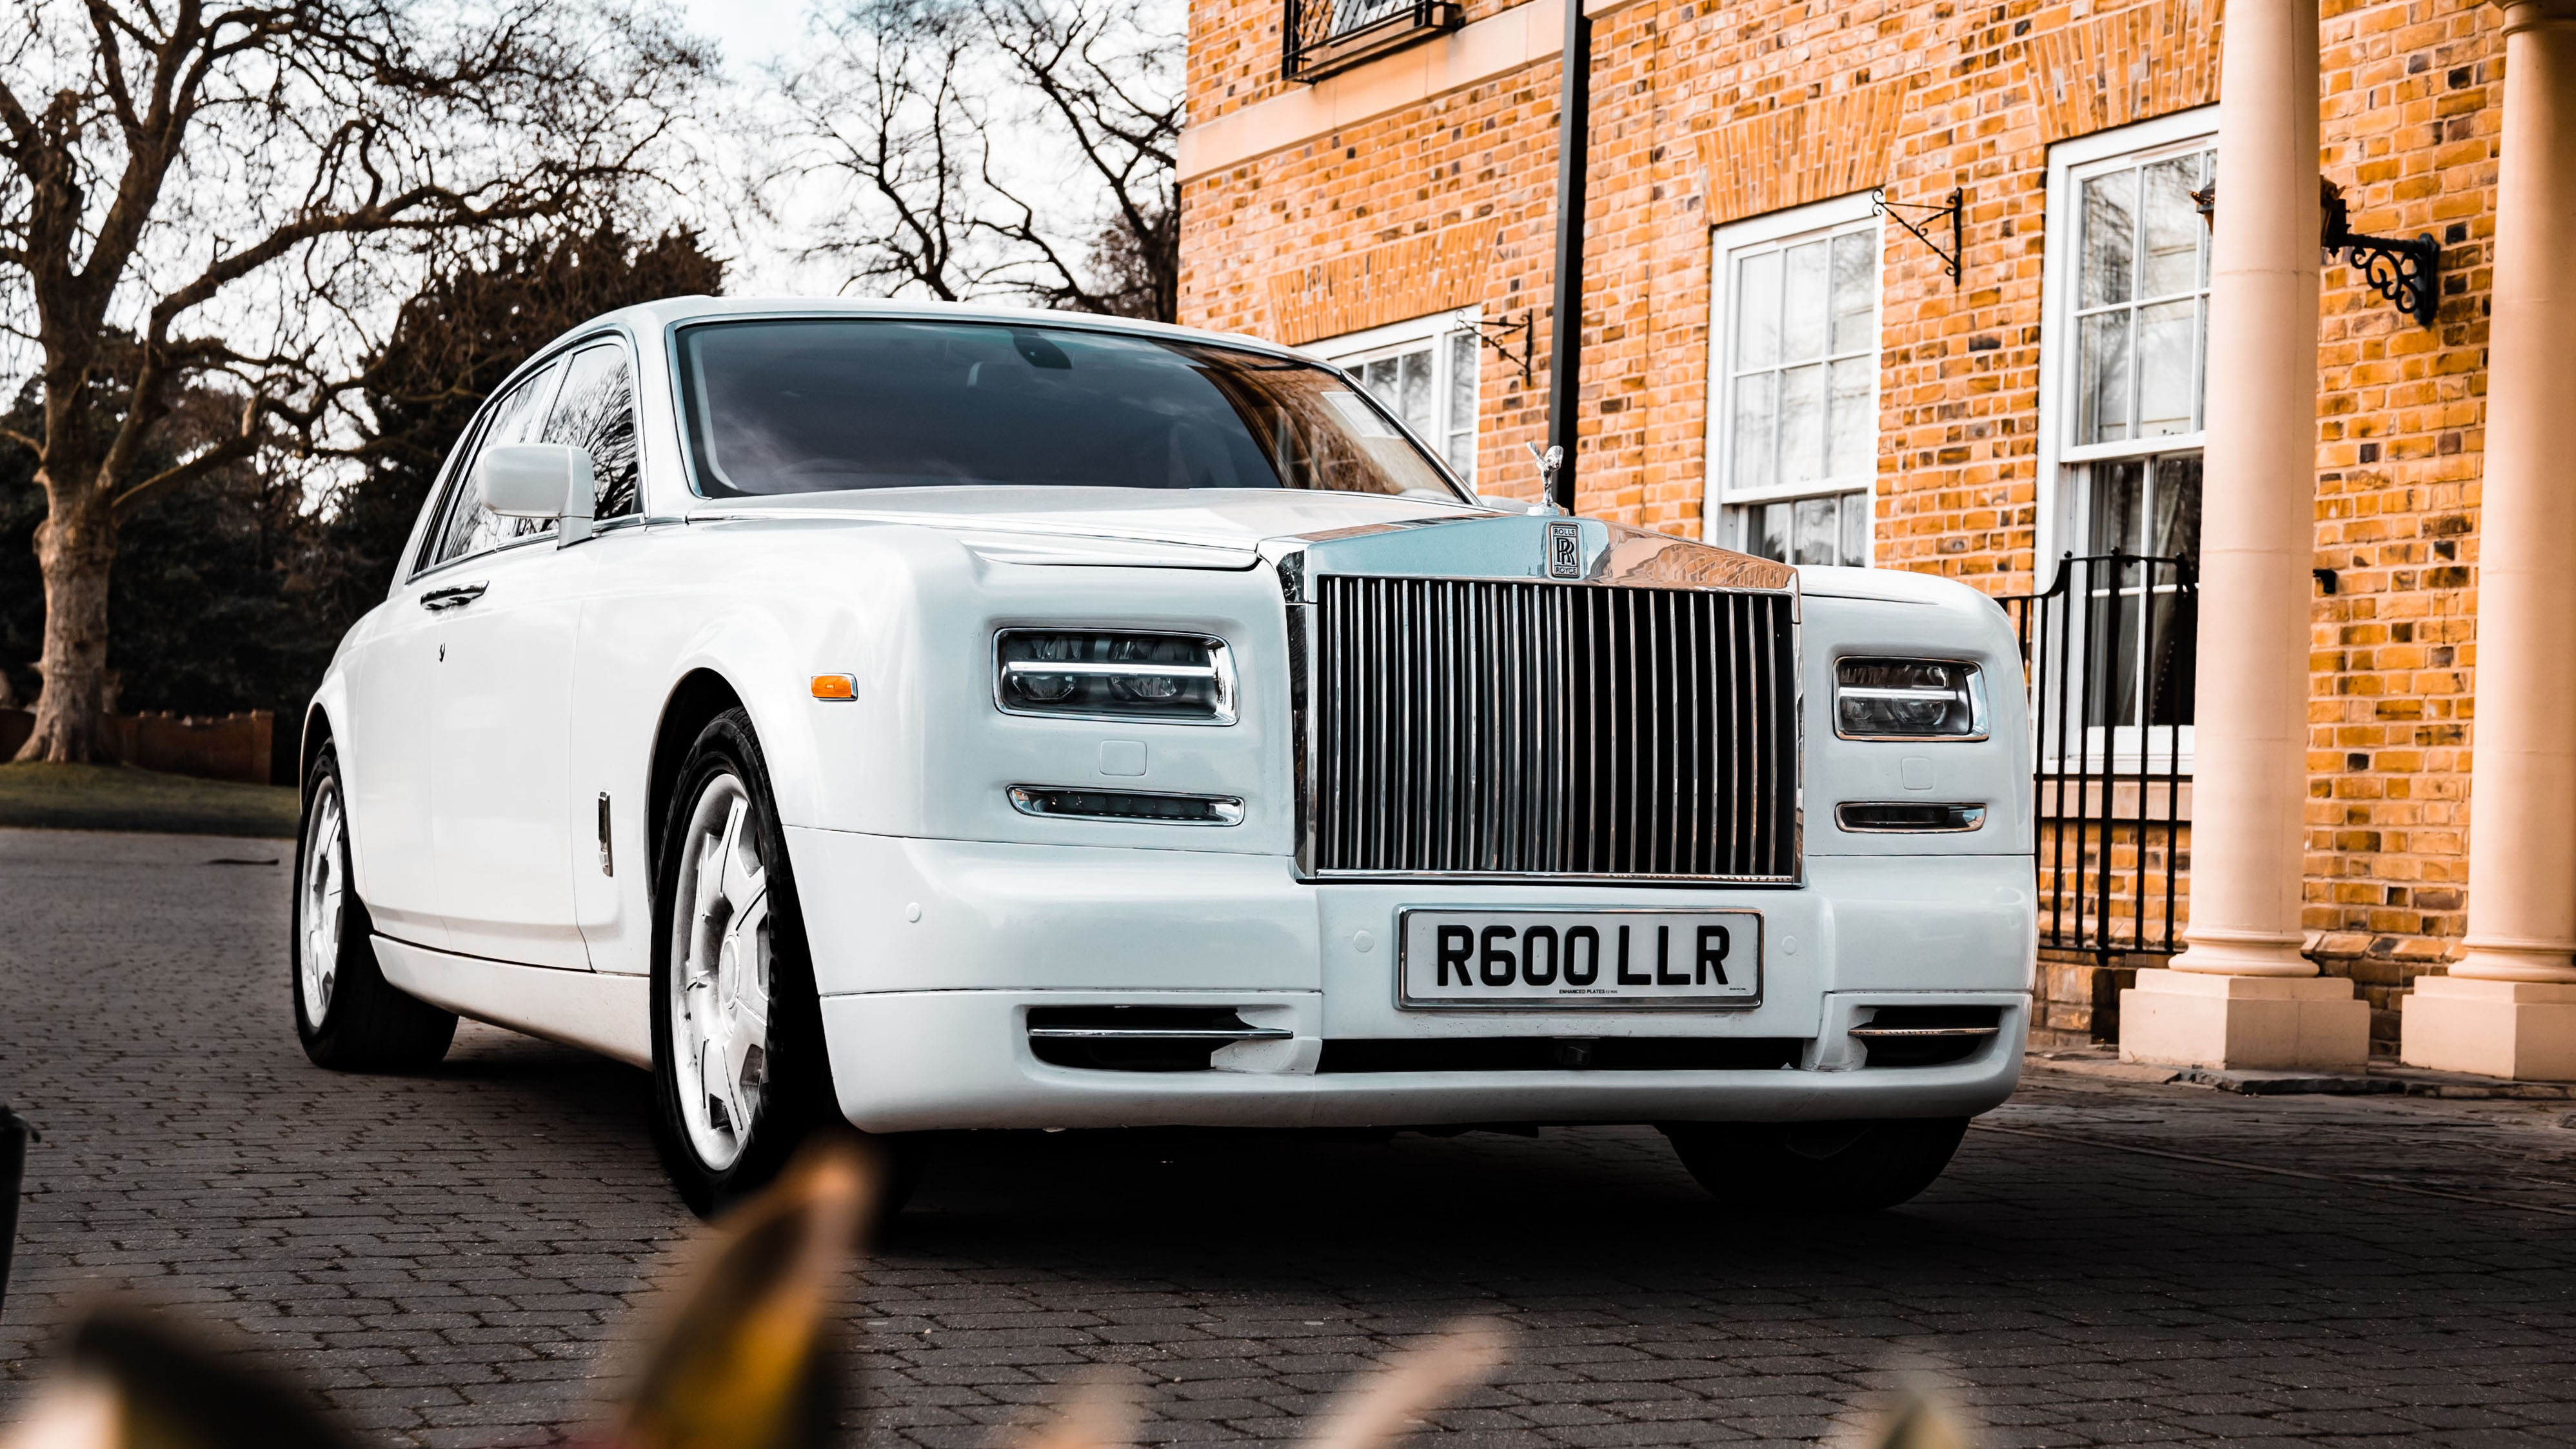 Modern white Rolls-Royce Phantom with its large chrome alloy wheels and iconic chrome front grill in attendance at a popular wedding venue in Hornchurch in Essex.